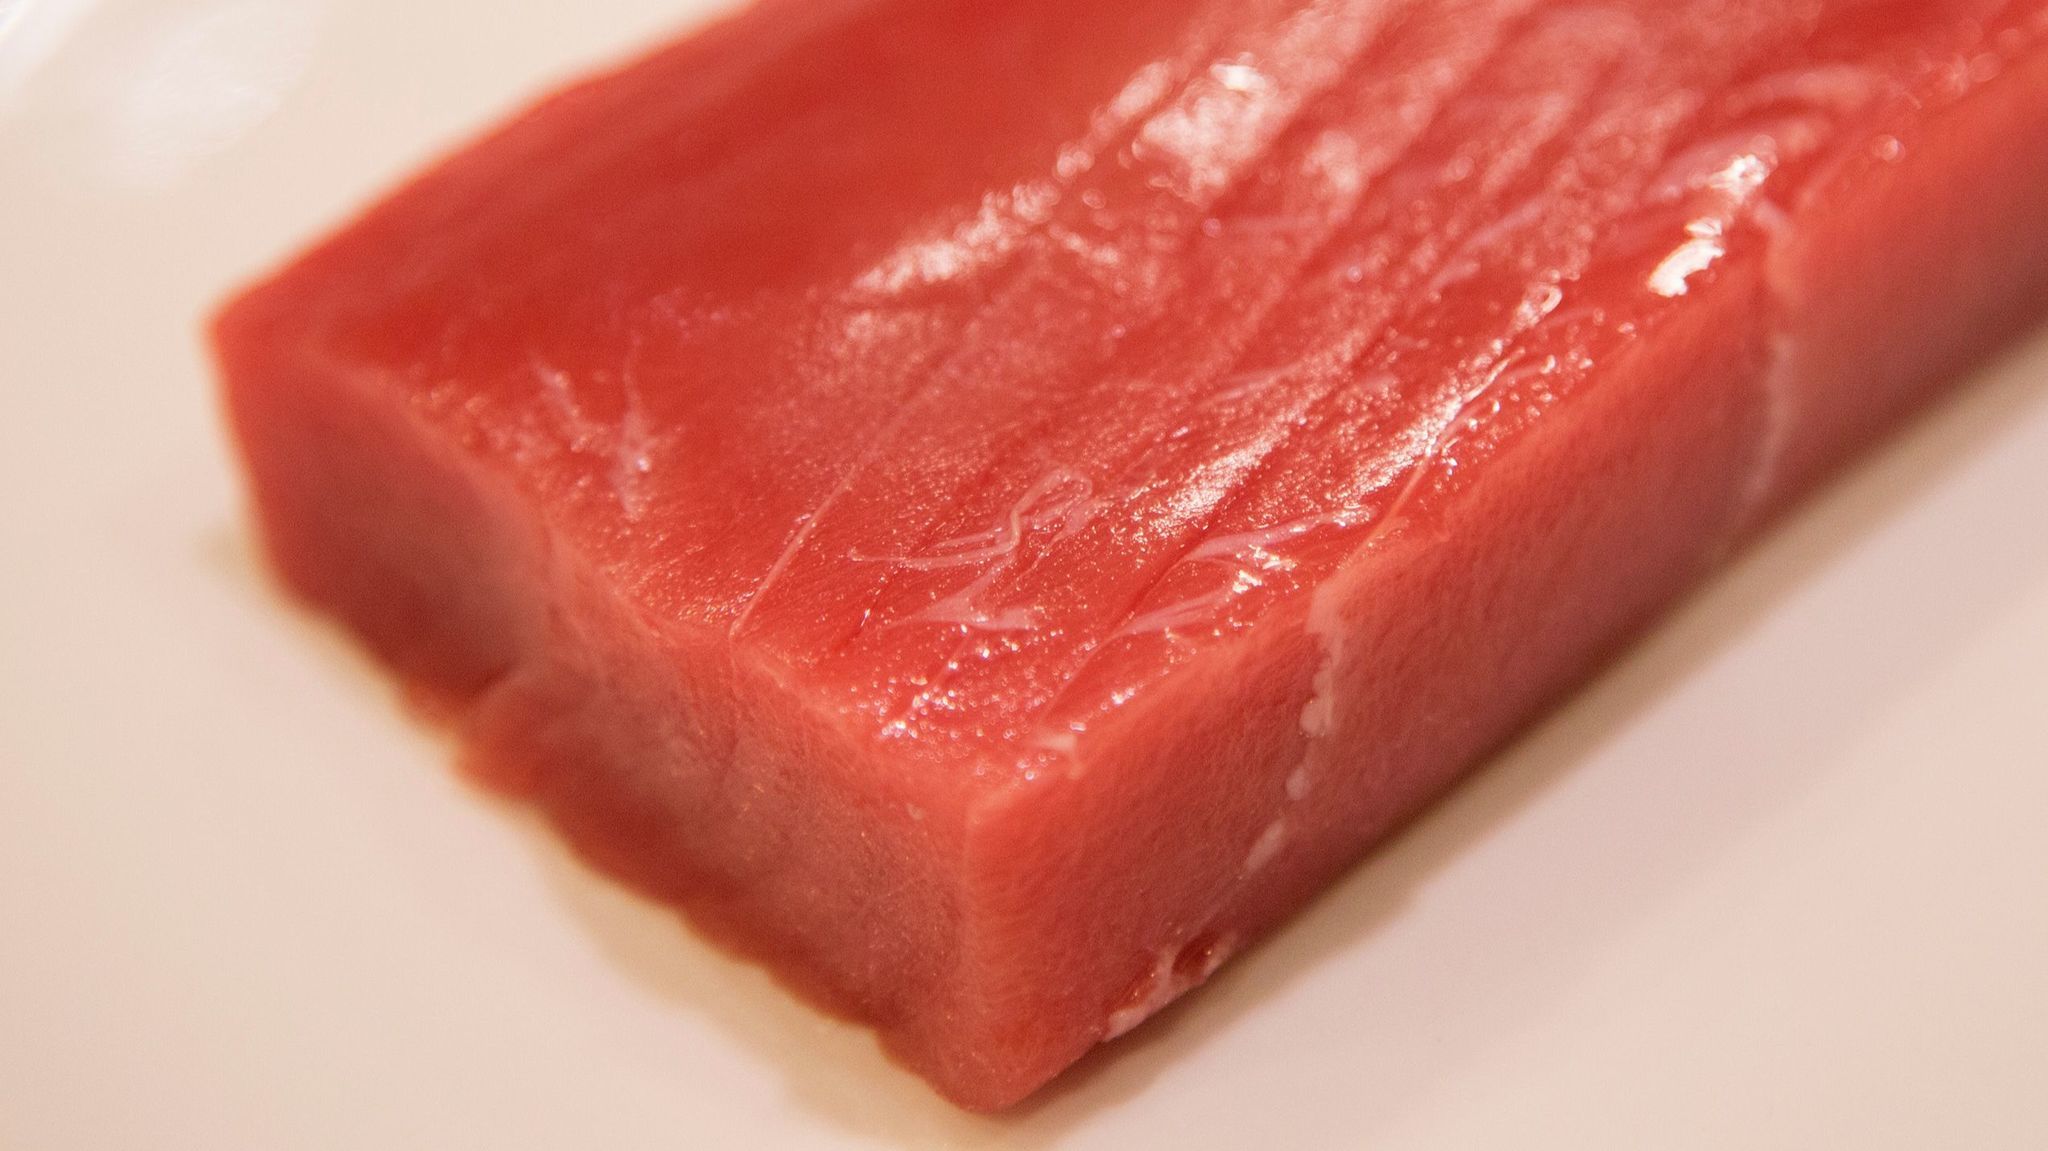 It's time to avoid bluefin tuna.